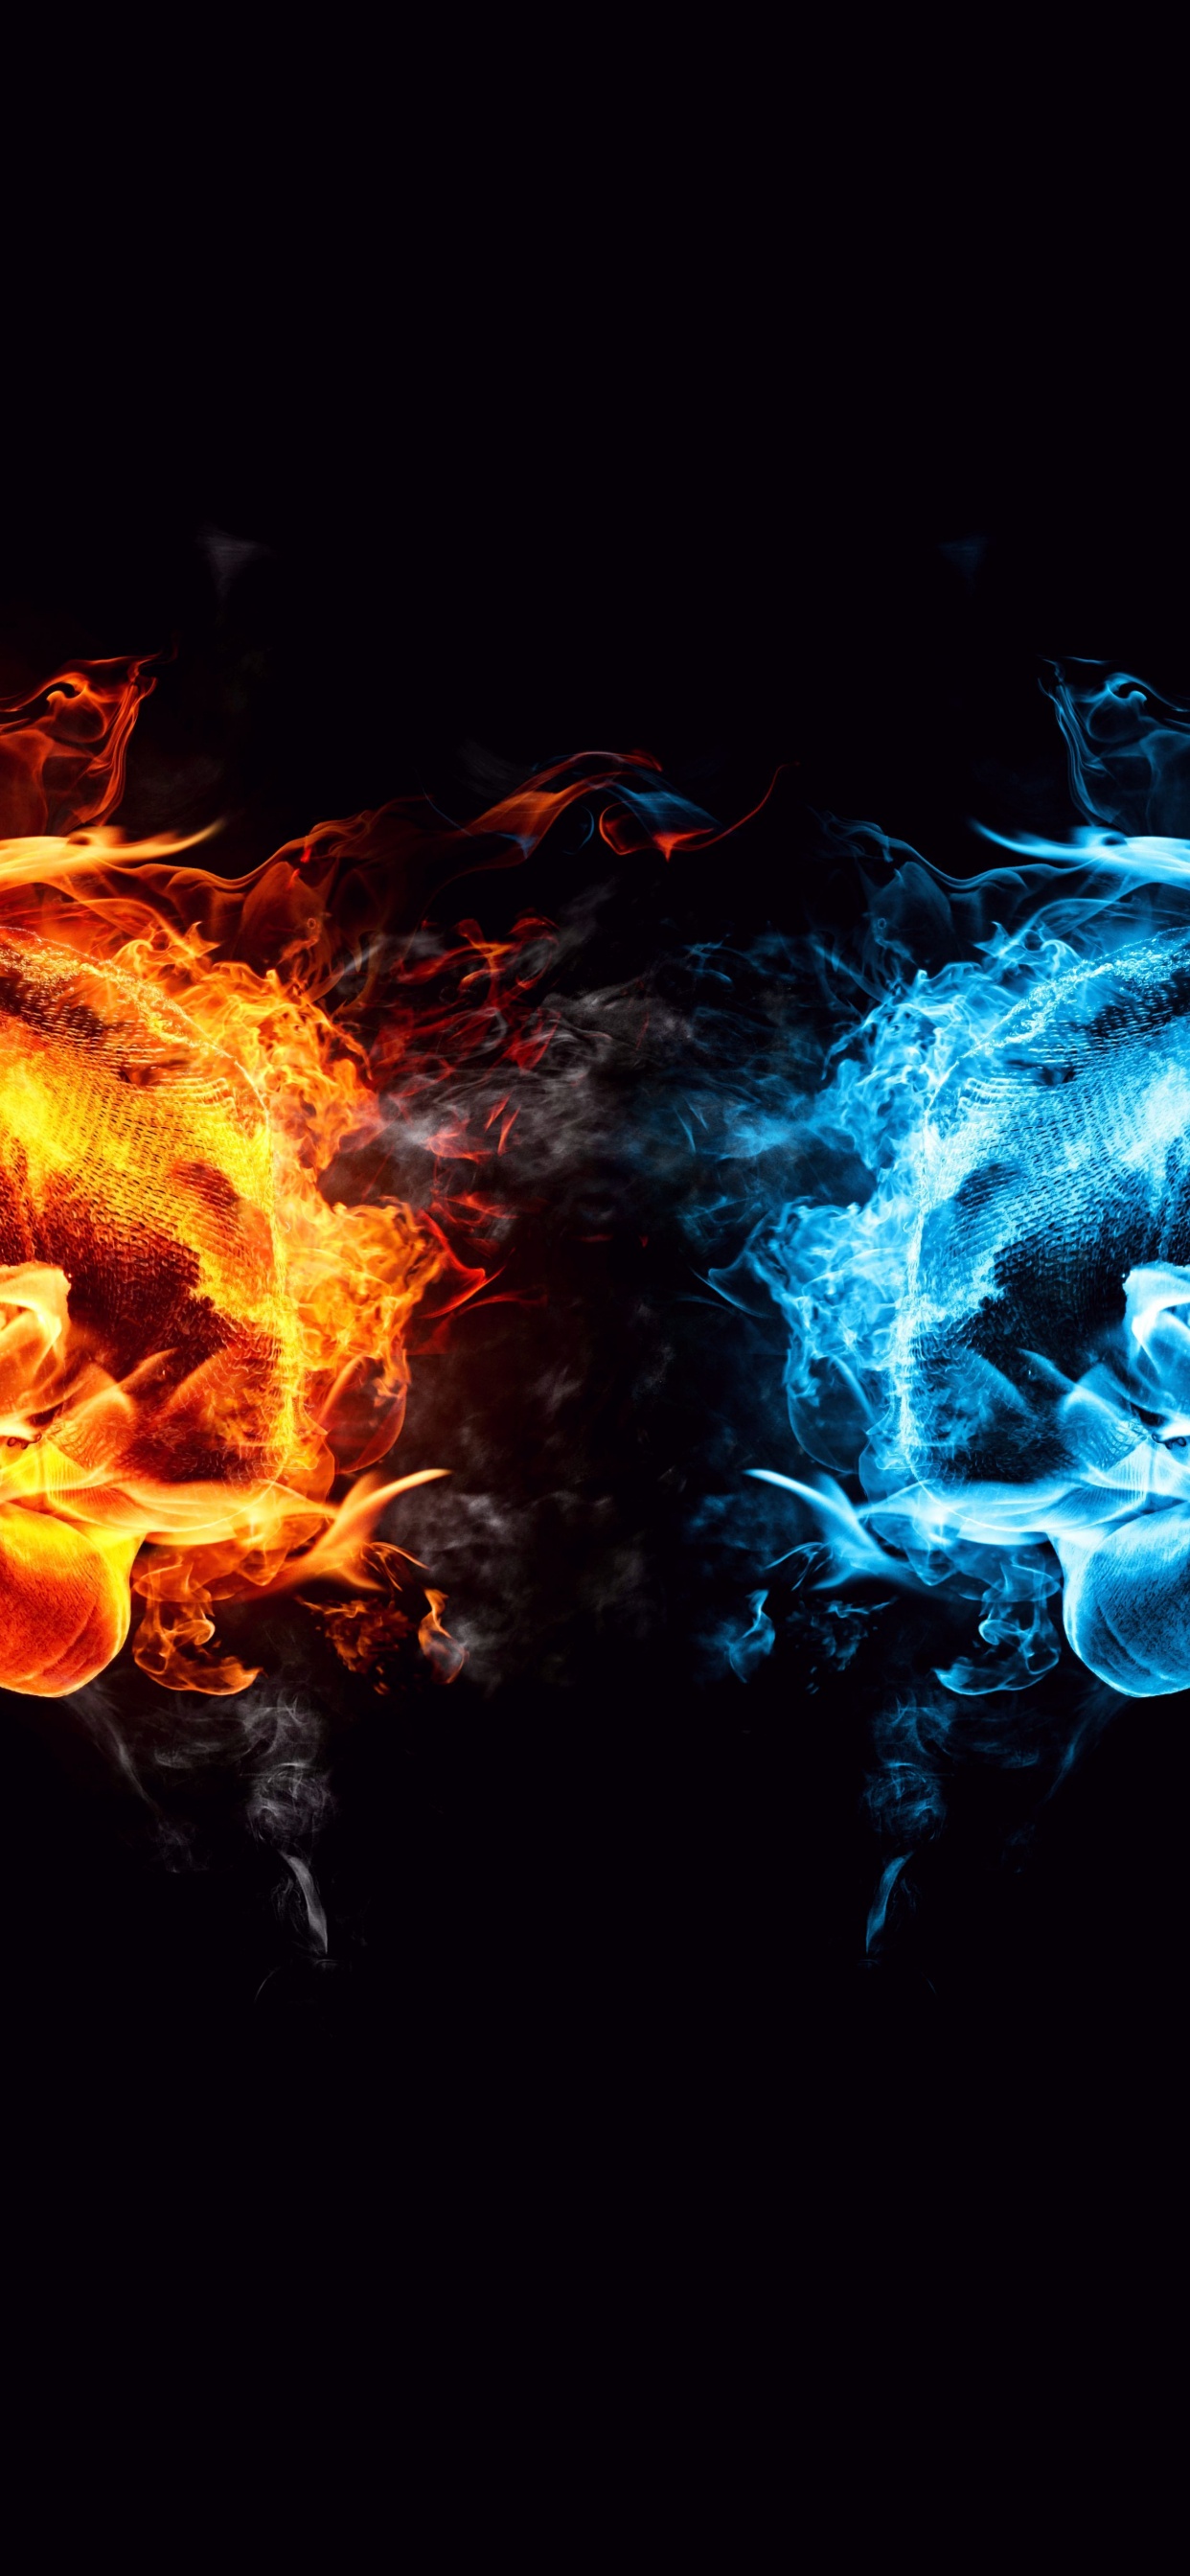 Blue and Orange Flame Illustration. Wallpaper in 1242x2688 Resolution